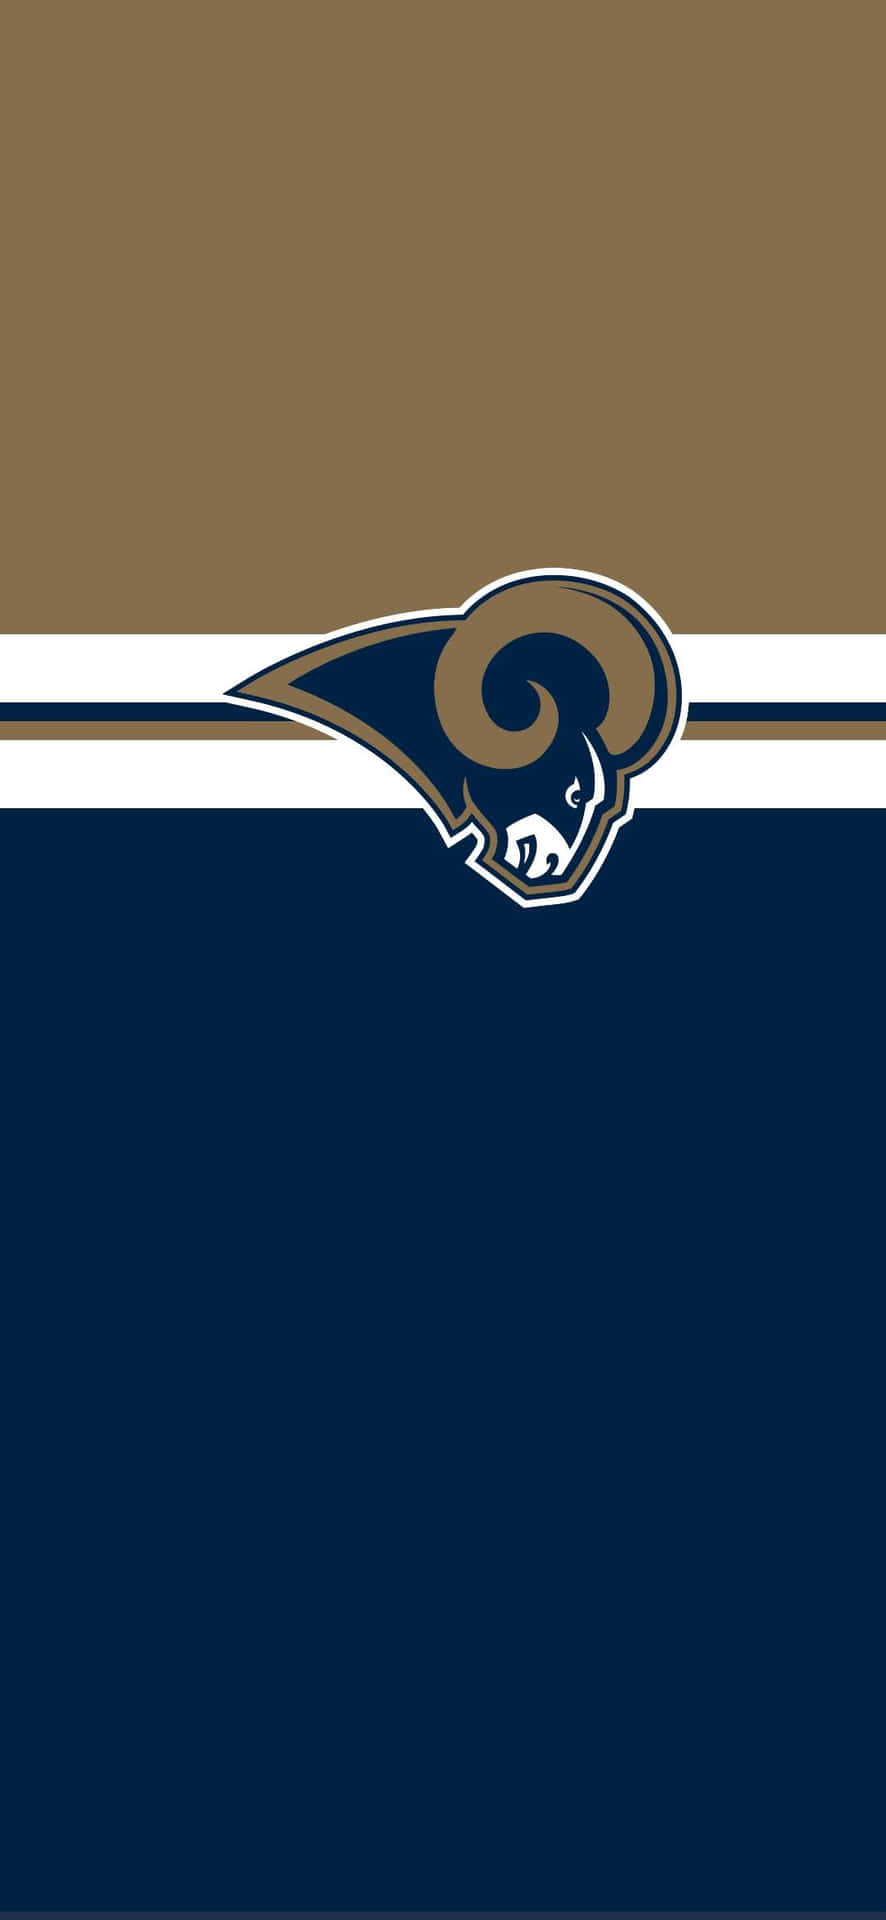 Get the most out of your iPhone with Rams Wallpaper